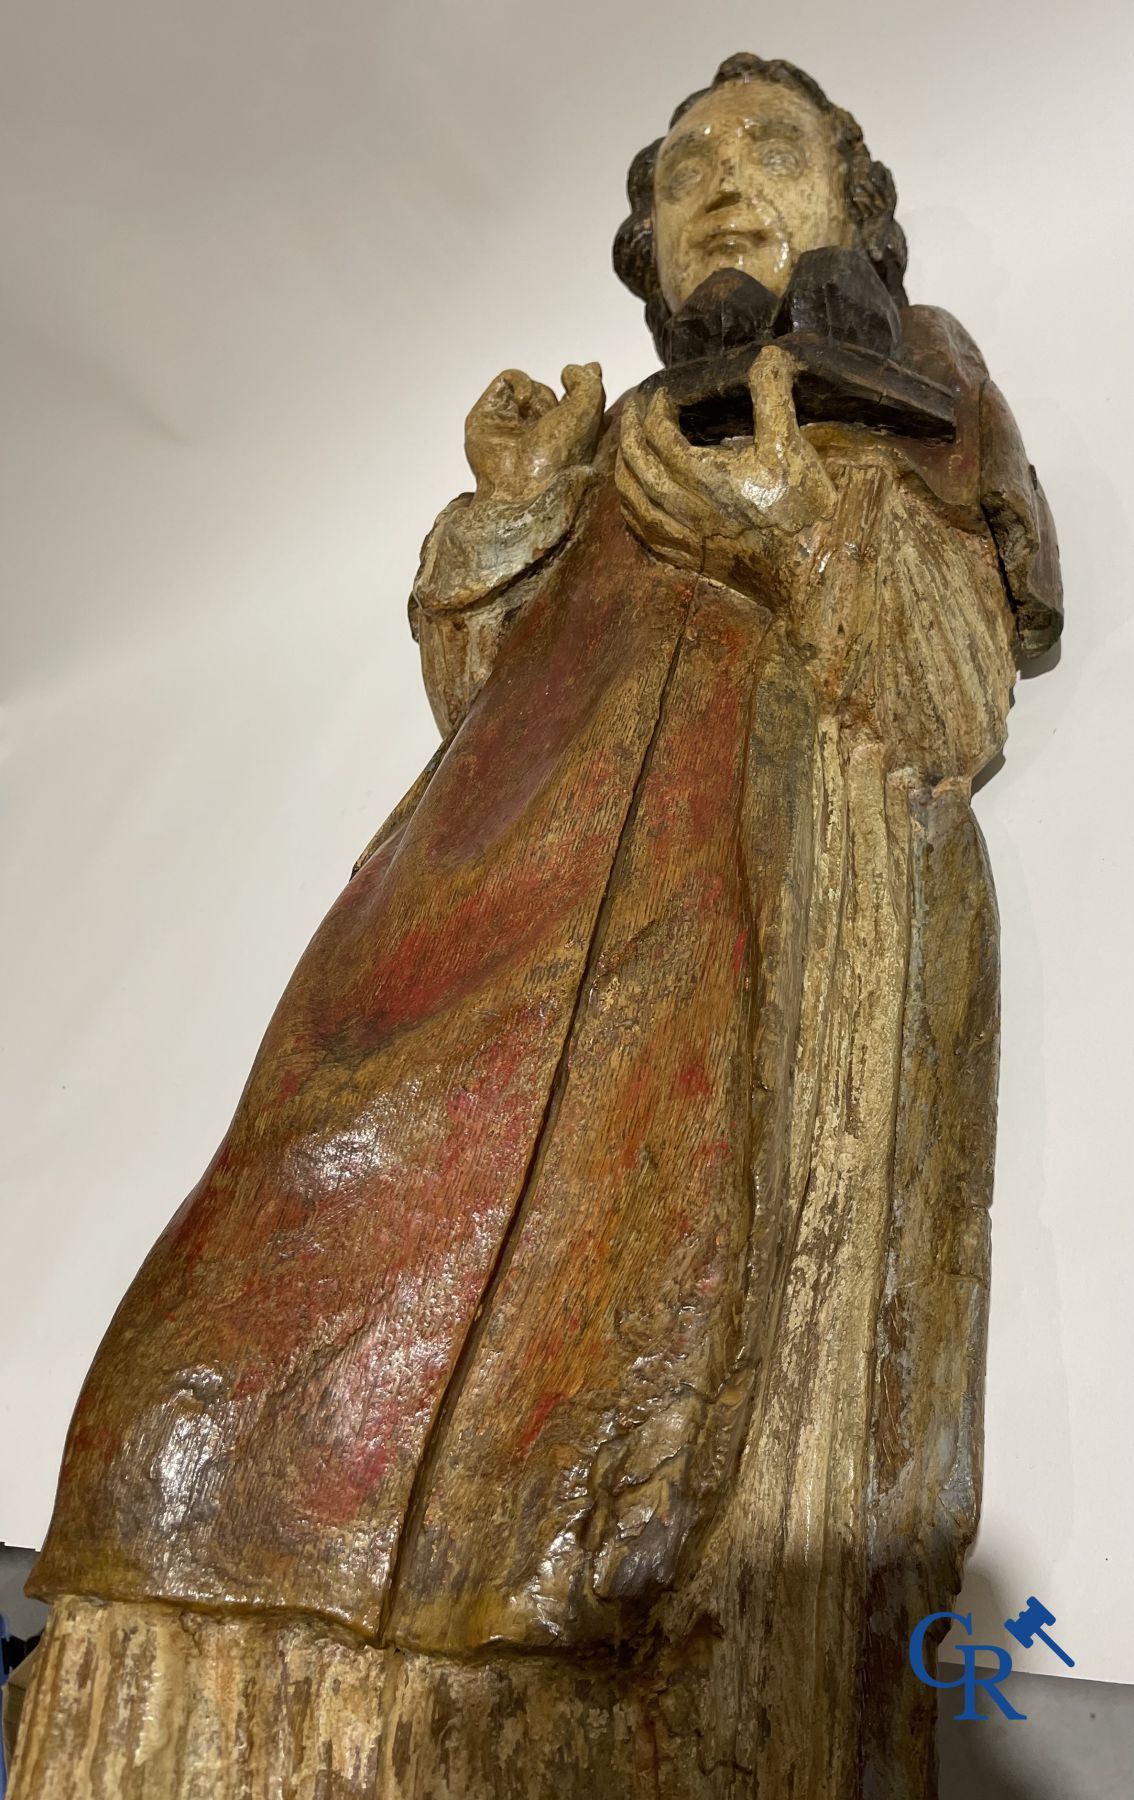 Wooden sculpture: Polychrome wood sculpture of a saint. Saint Stephen. Probably 17th century. - Image 23 of 26